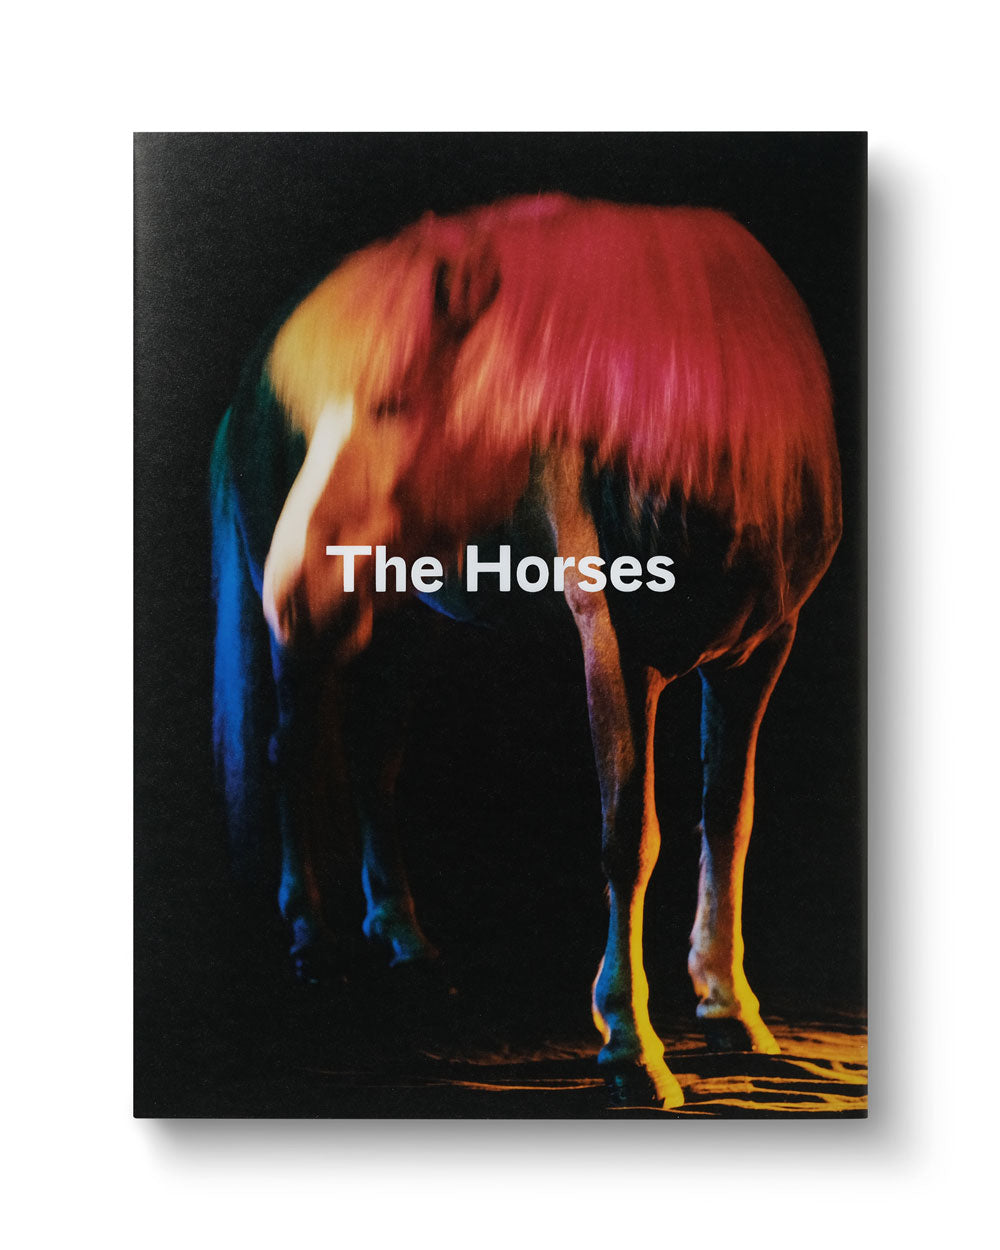 The Horses, Gareth McConnell | £40